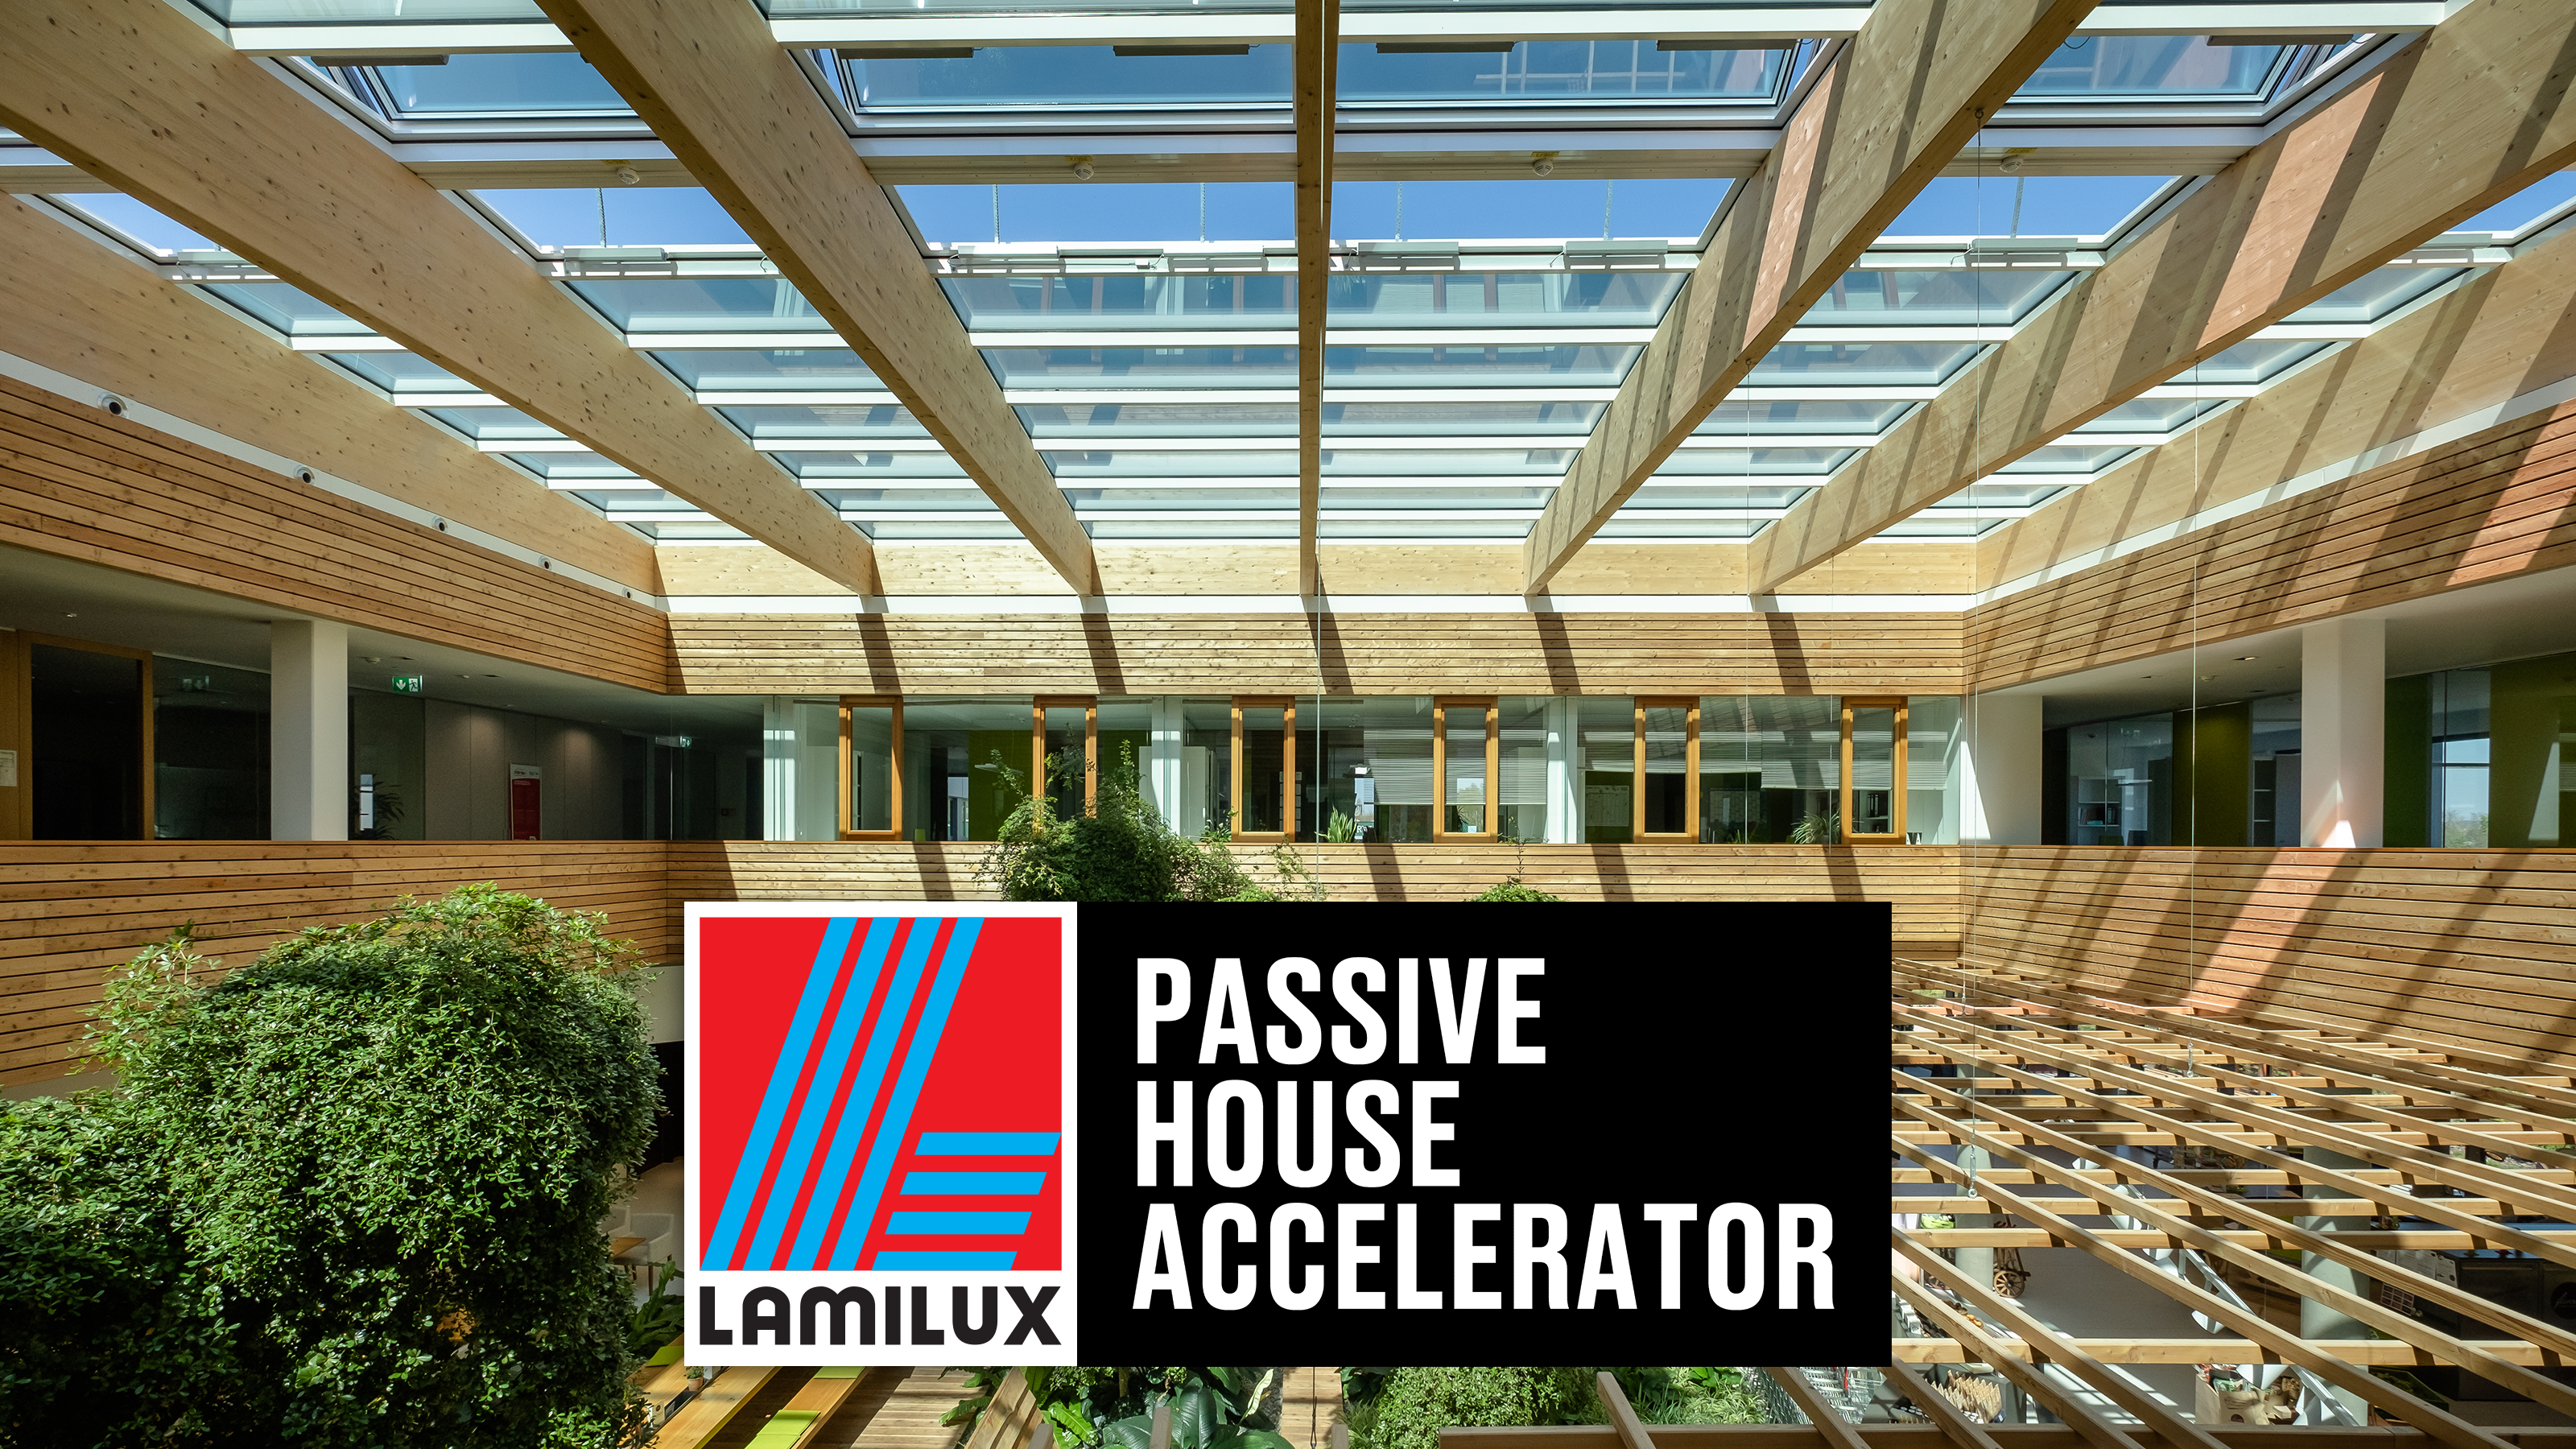 LAMILUX Becomes a Patron Sponsor of Passive House Accelerator